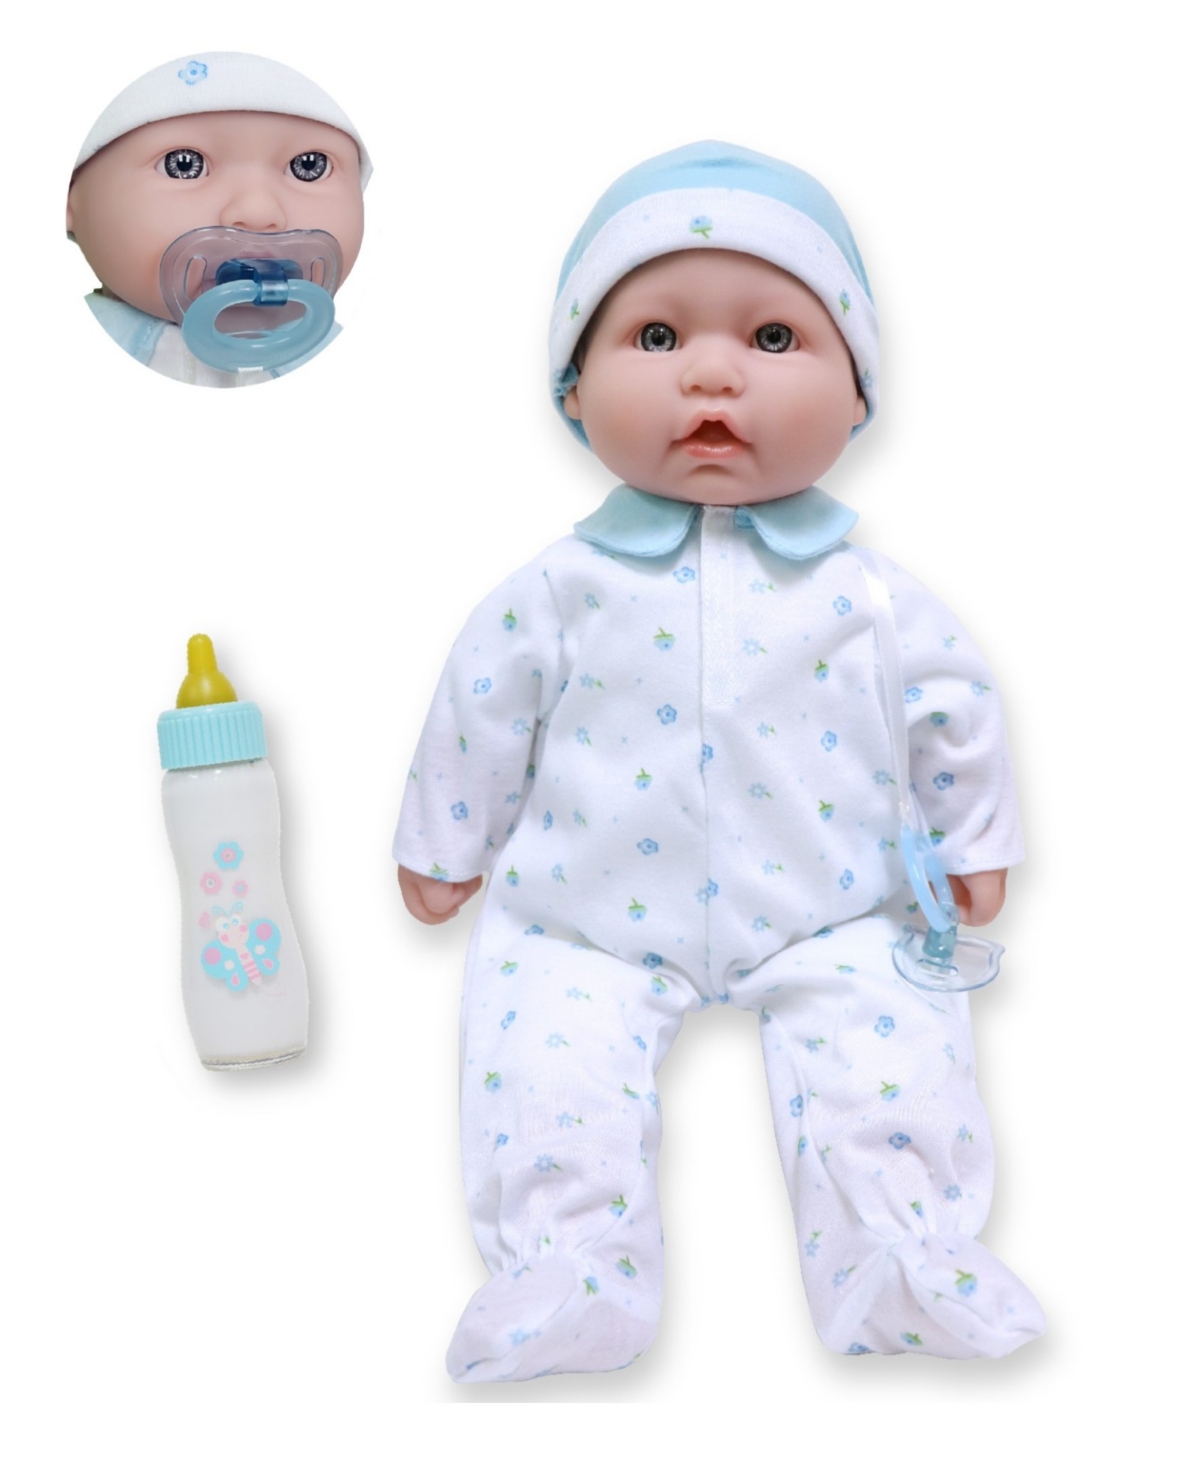 Jc Toys La Baby Caucasian 16" Soft Body Baby Doll Blue Outfit